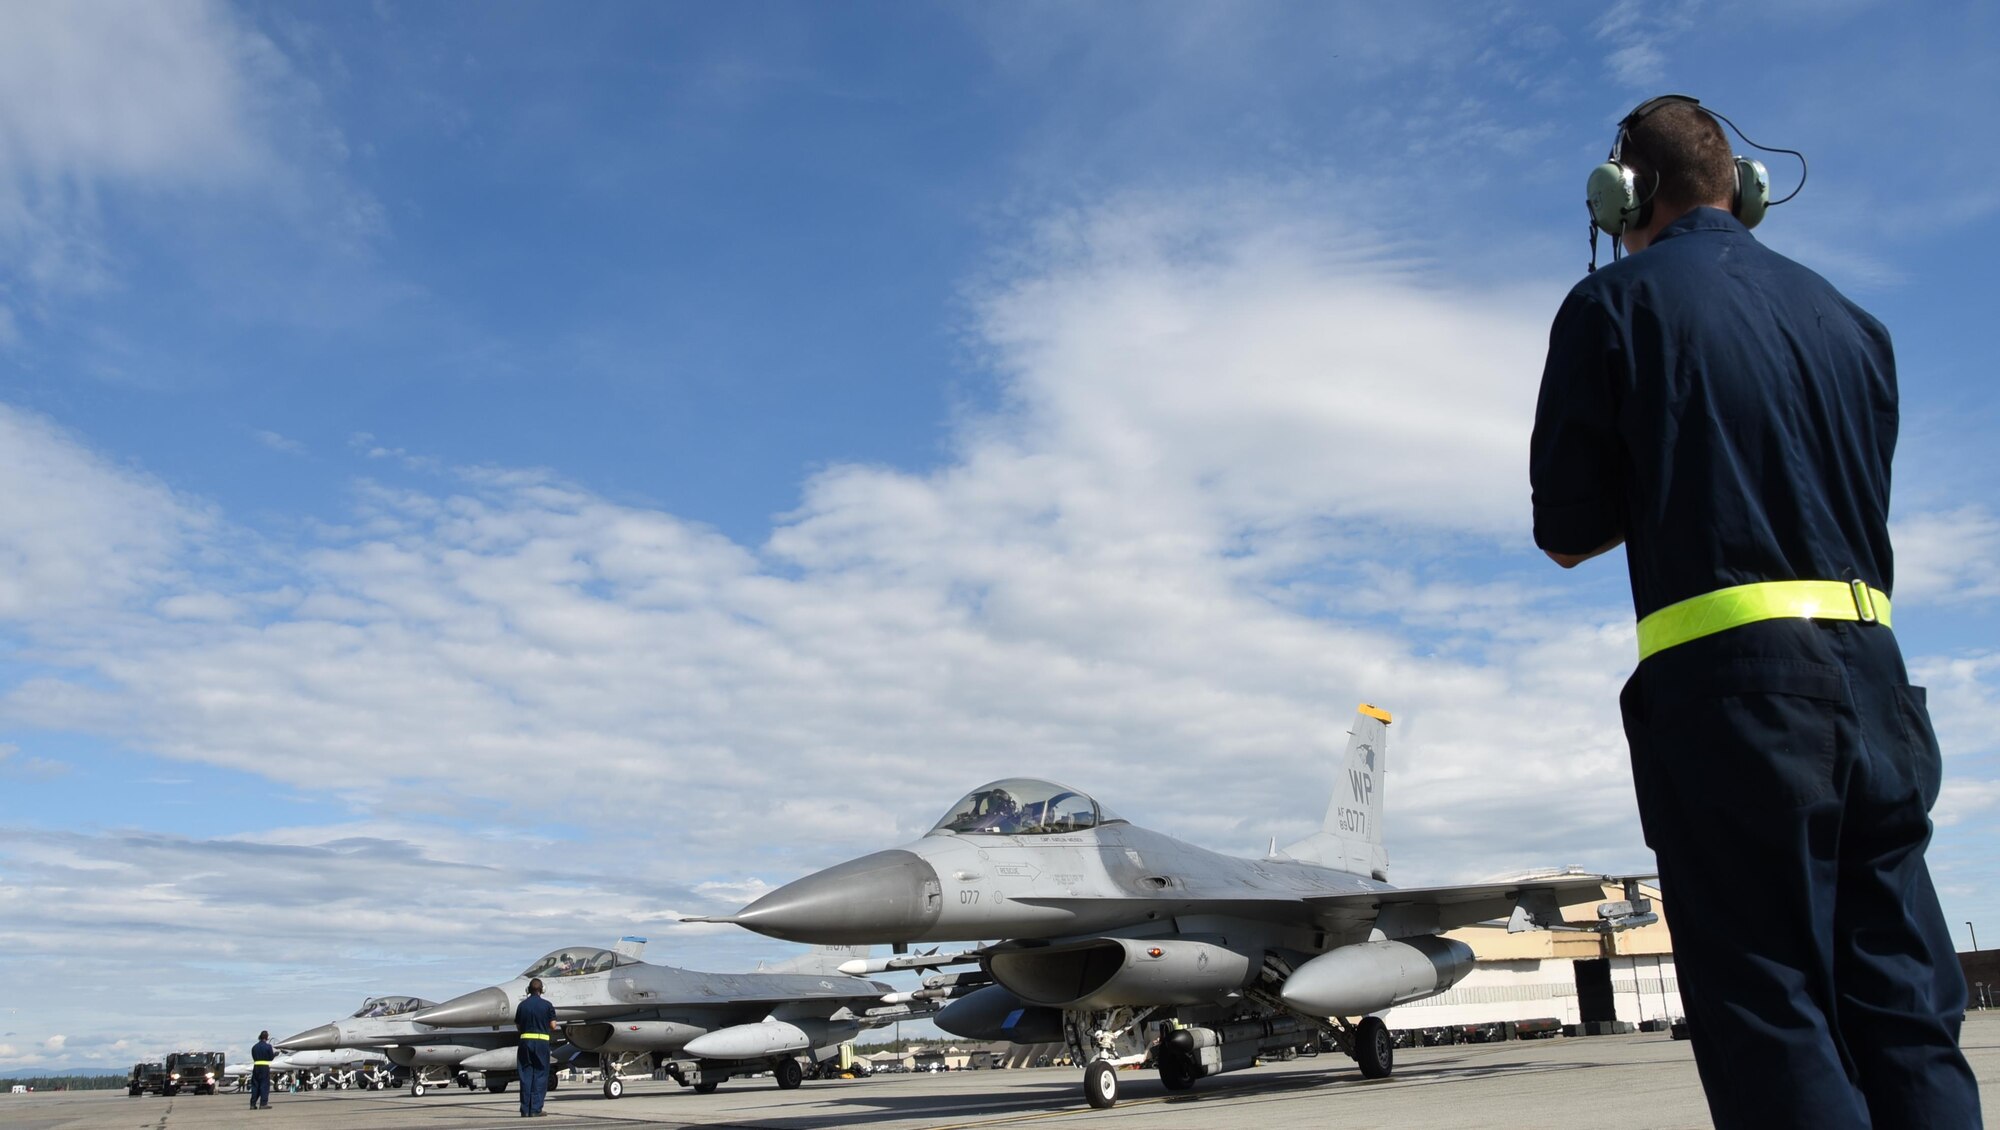 U.S. Air Force Airmen assigned to Kunsan Air Base, Republic of Korea, prepare F-16 Fighting Falcons for take-off during Red Flag-Alaska at Eielson Air Force Base, Alaska, Aug. 1, 2017. RF-A is a training exercise that provides joint offensive counter-air, interdiction, close air support and large force employment training in a simulated combat environment. (U.S. Air Force photo by Staff Sgt. Joshua Rosales)